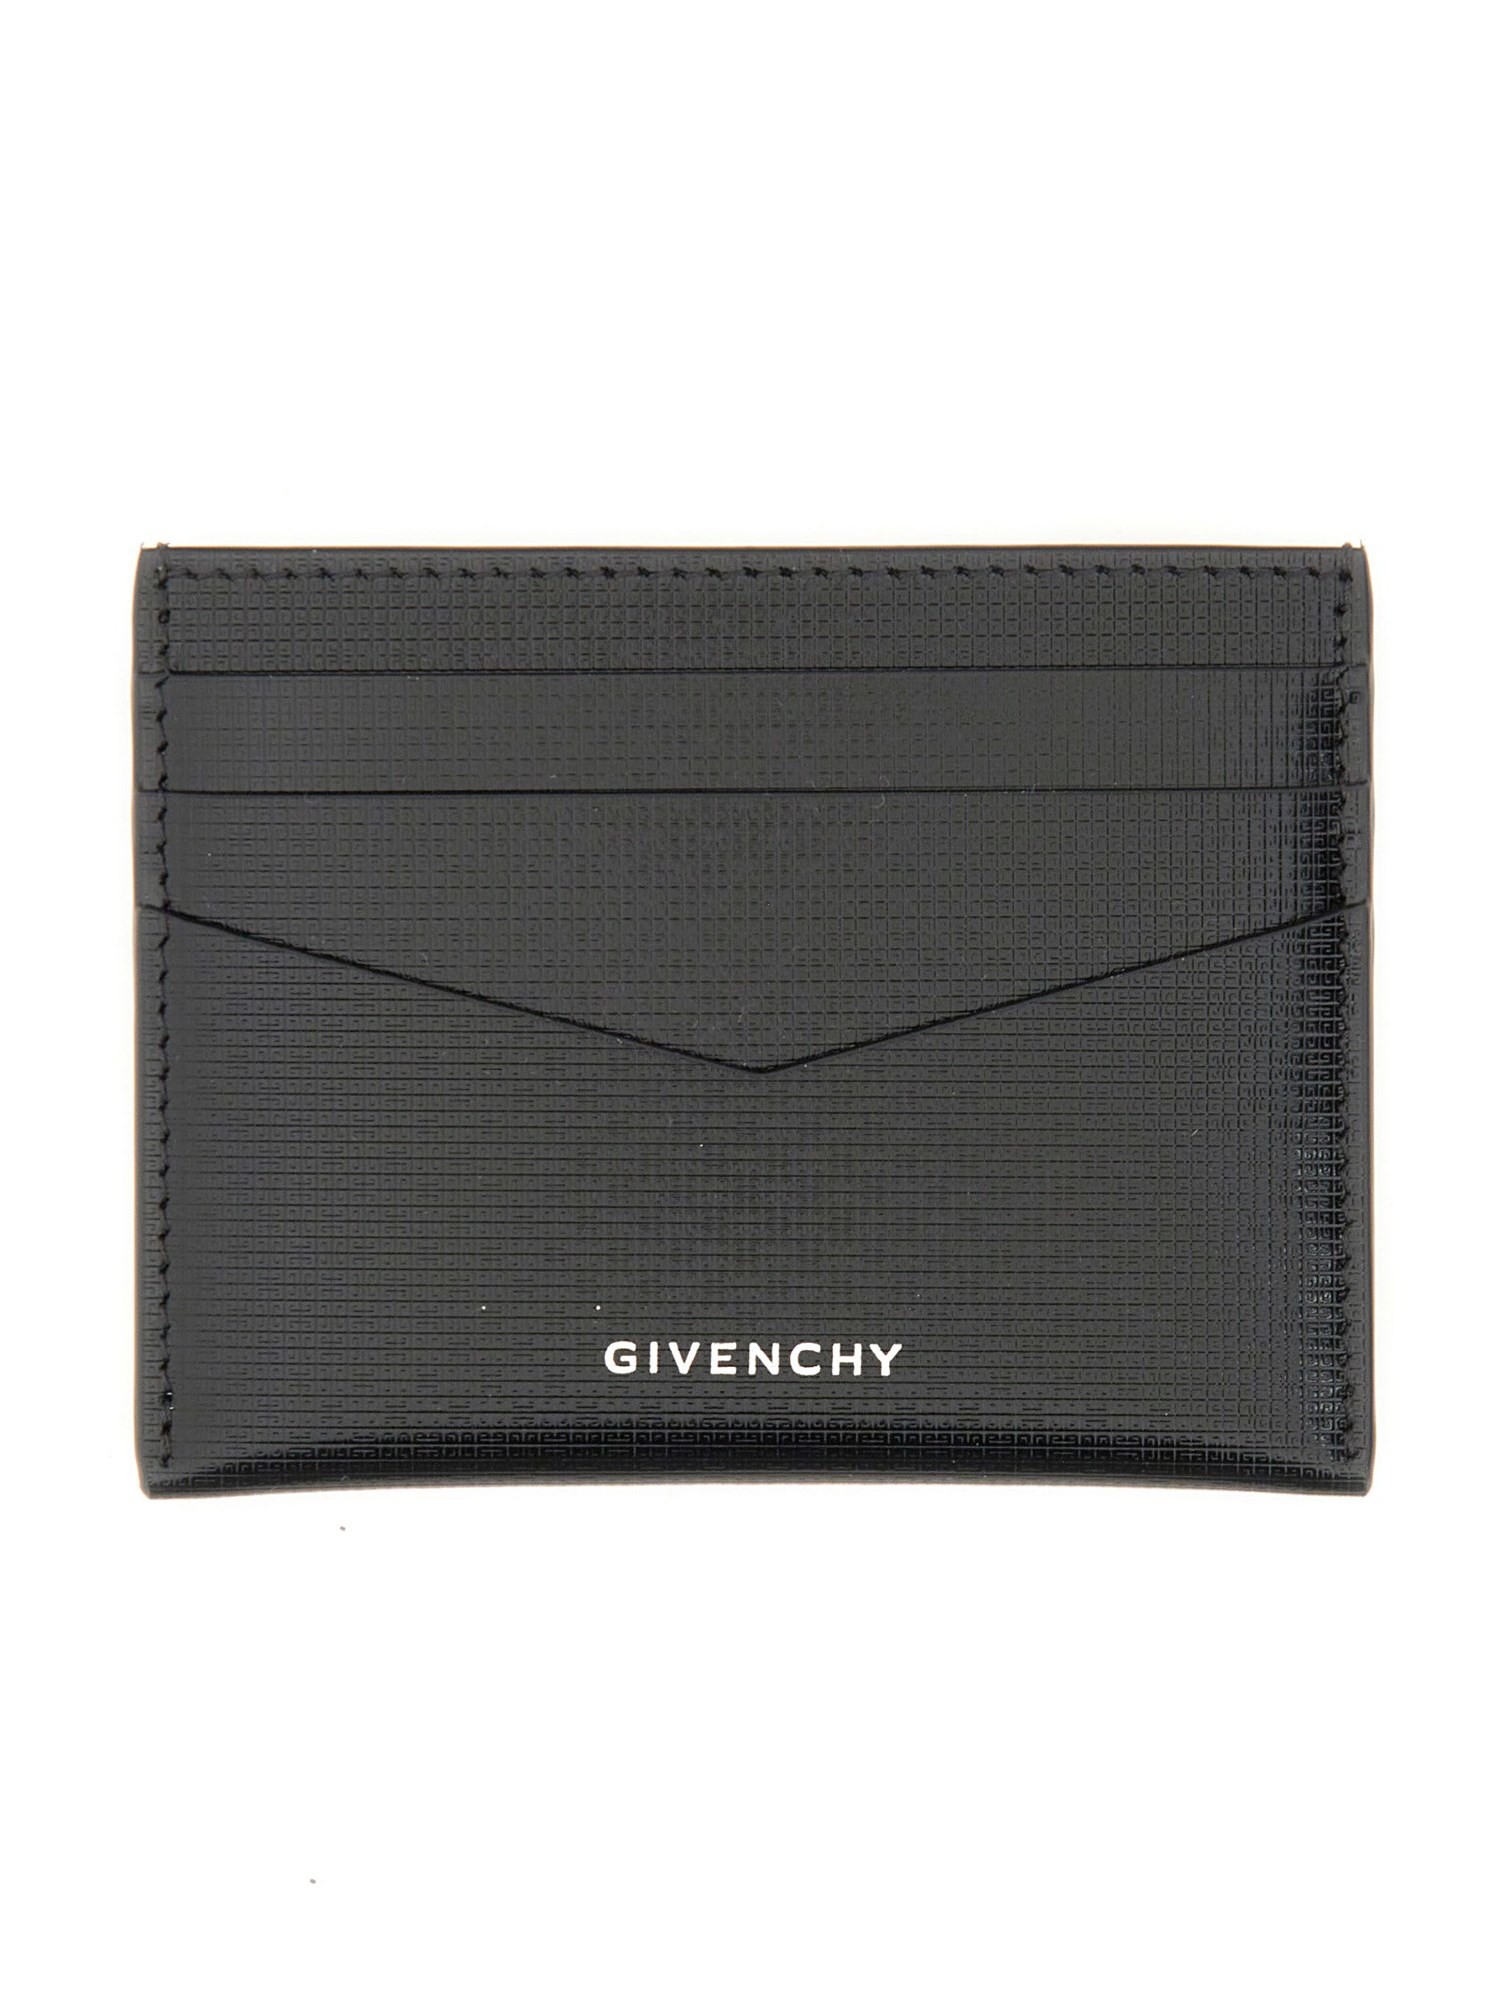 Givenchy givenchy classique 4g leather wallet